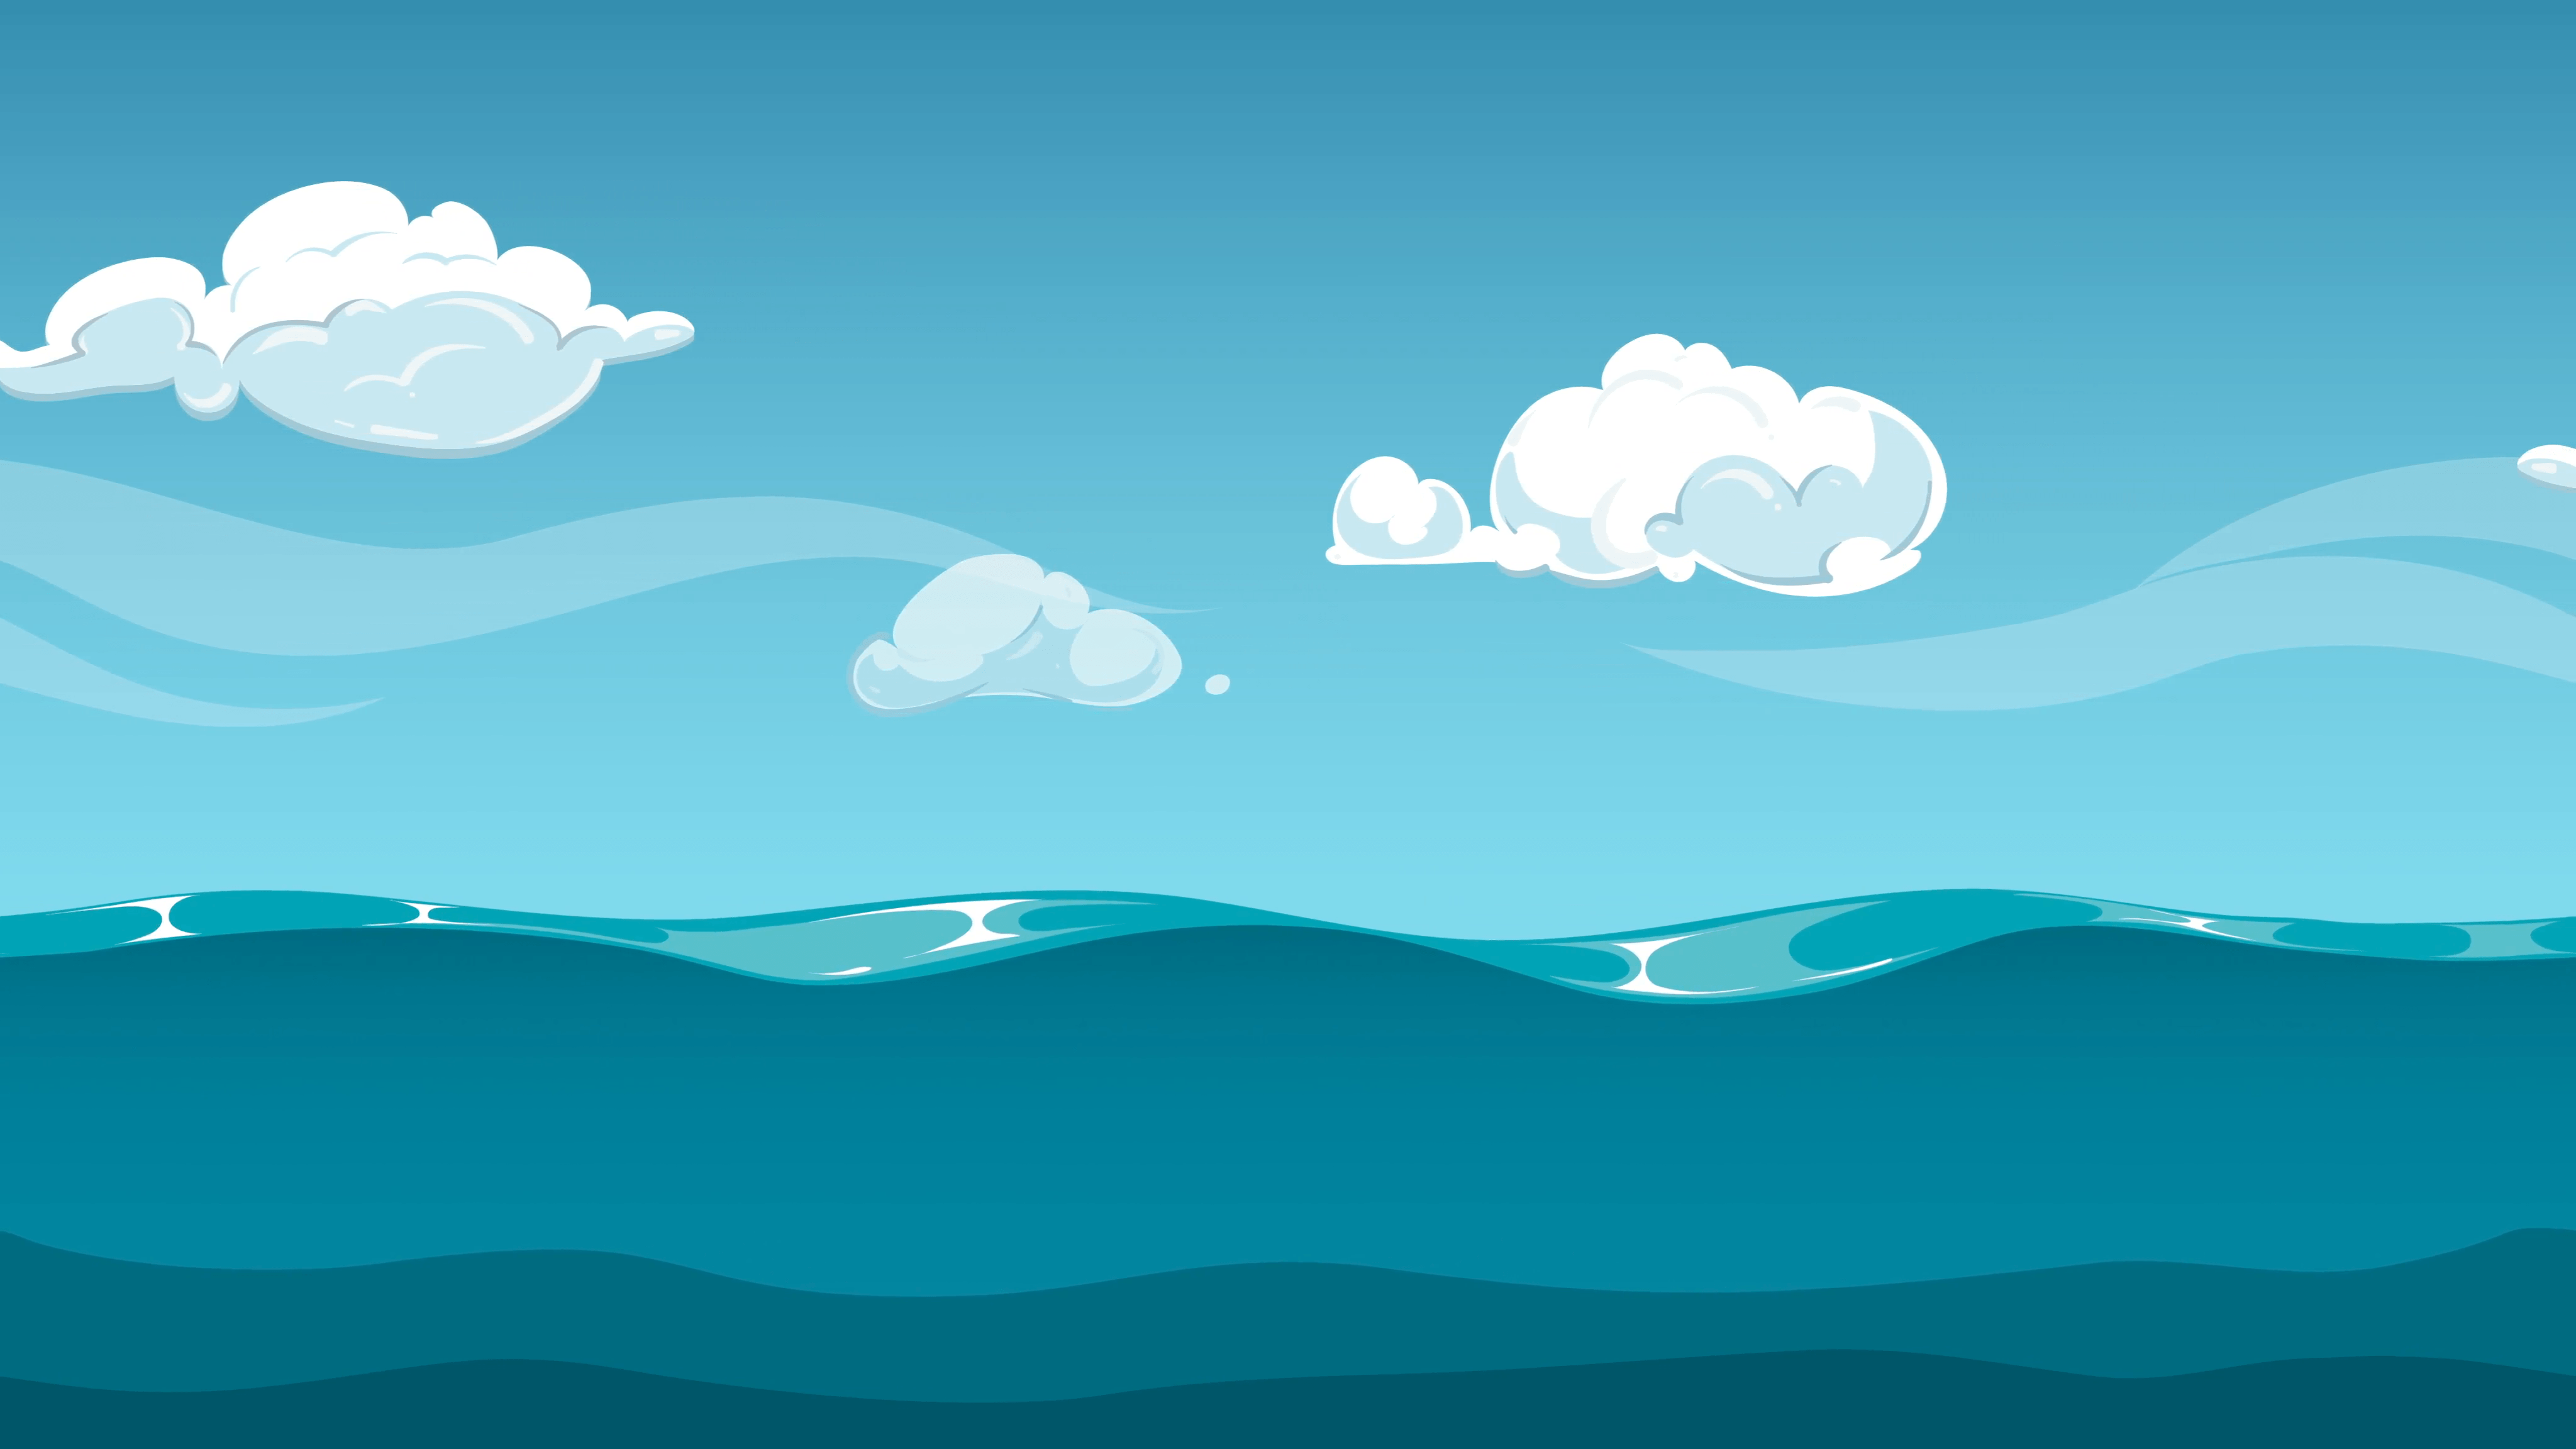 Ocean or sea horizon animated background. Water surface and blue sky